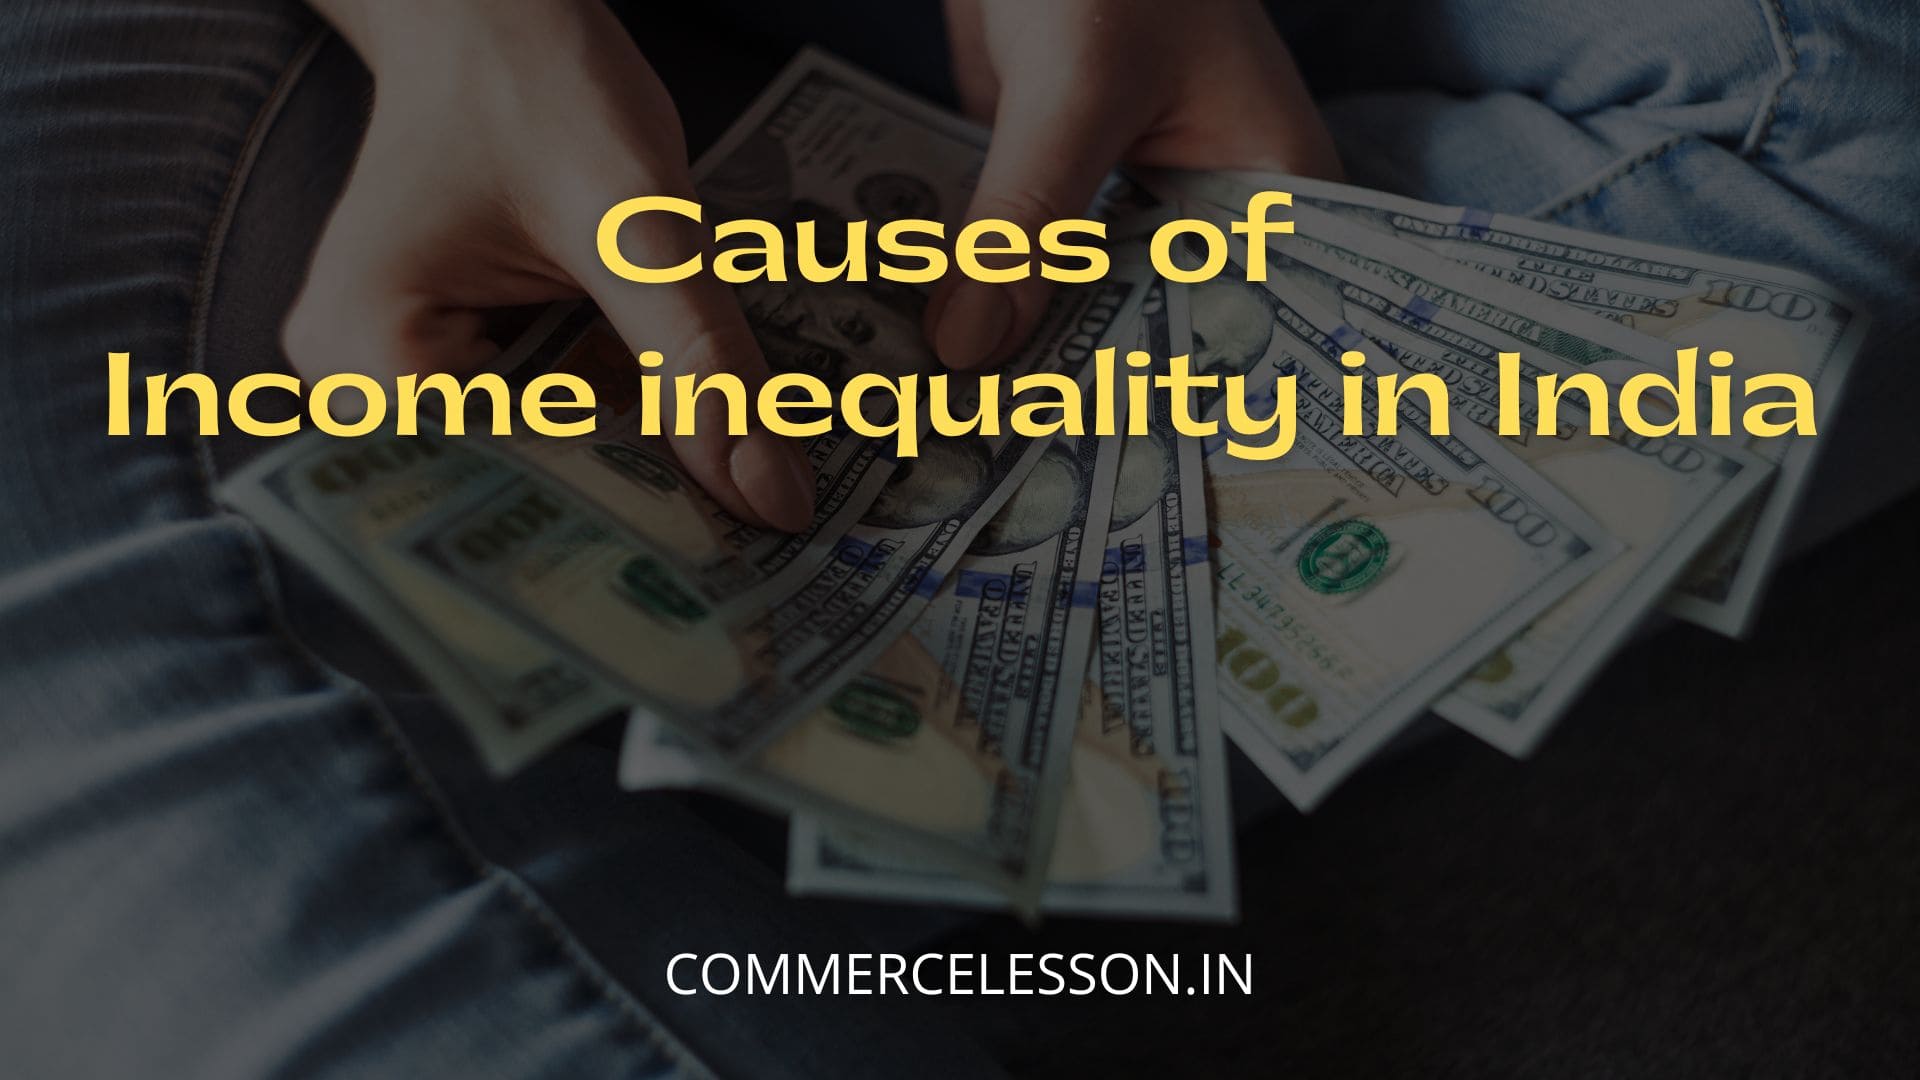 Causes of Income inequality in India